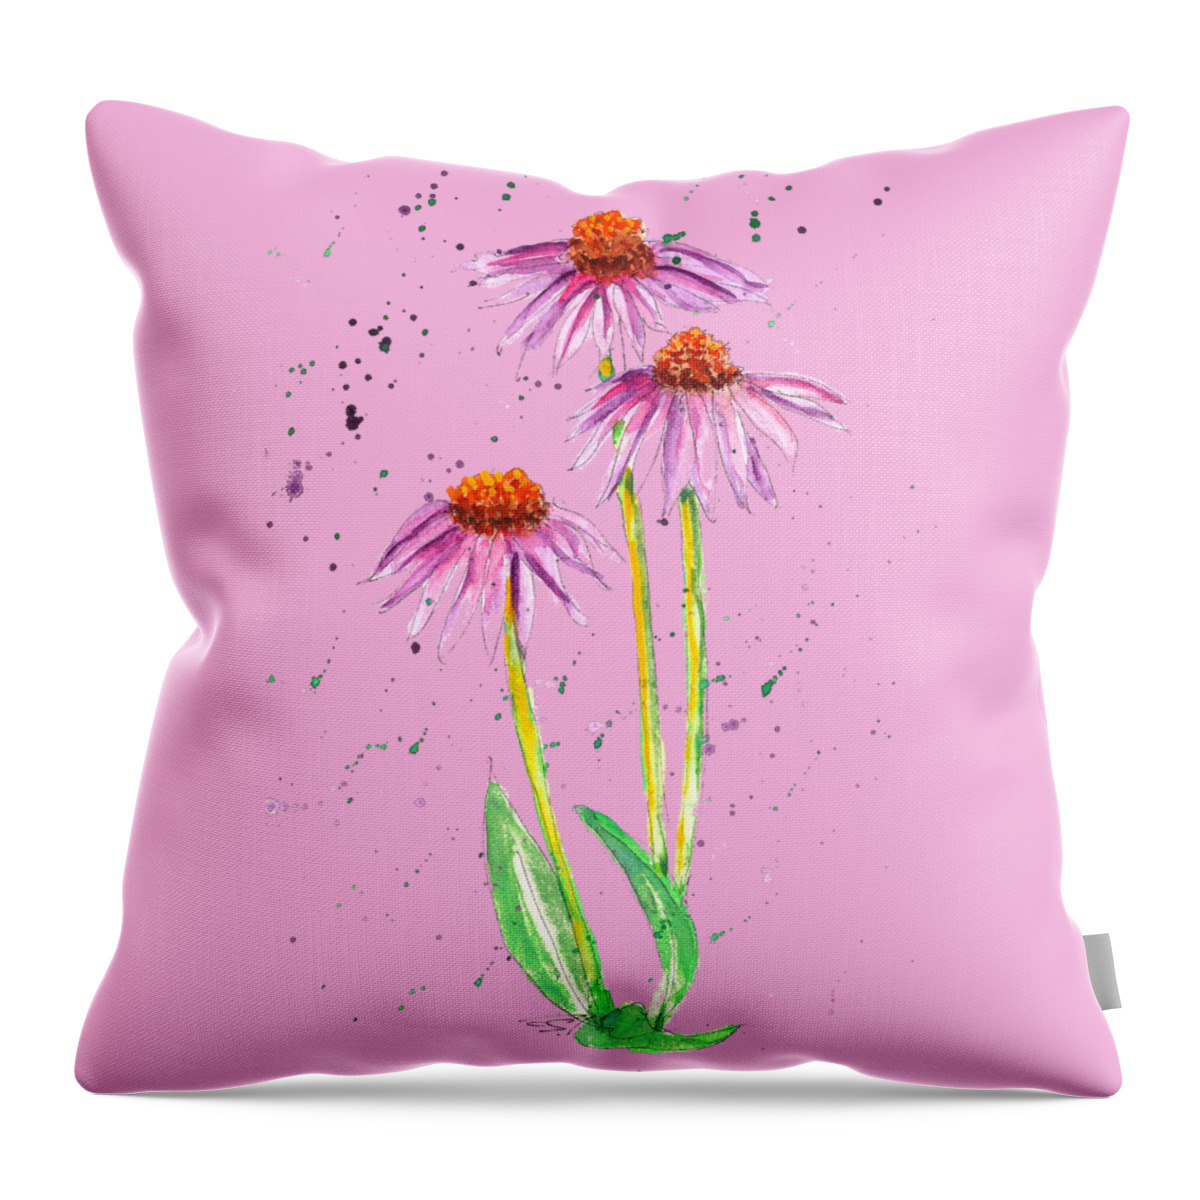 Cone Flower Throw Pillow featuring the painting Missouri Cone Flower by Petra Stephens